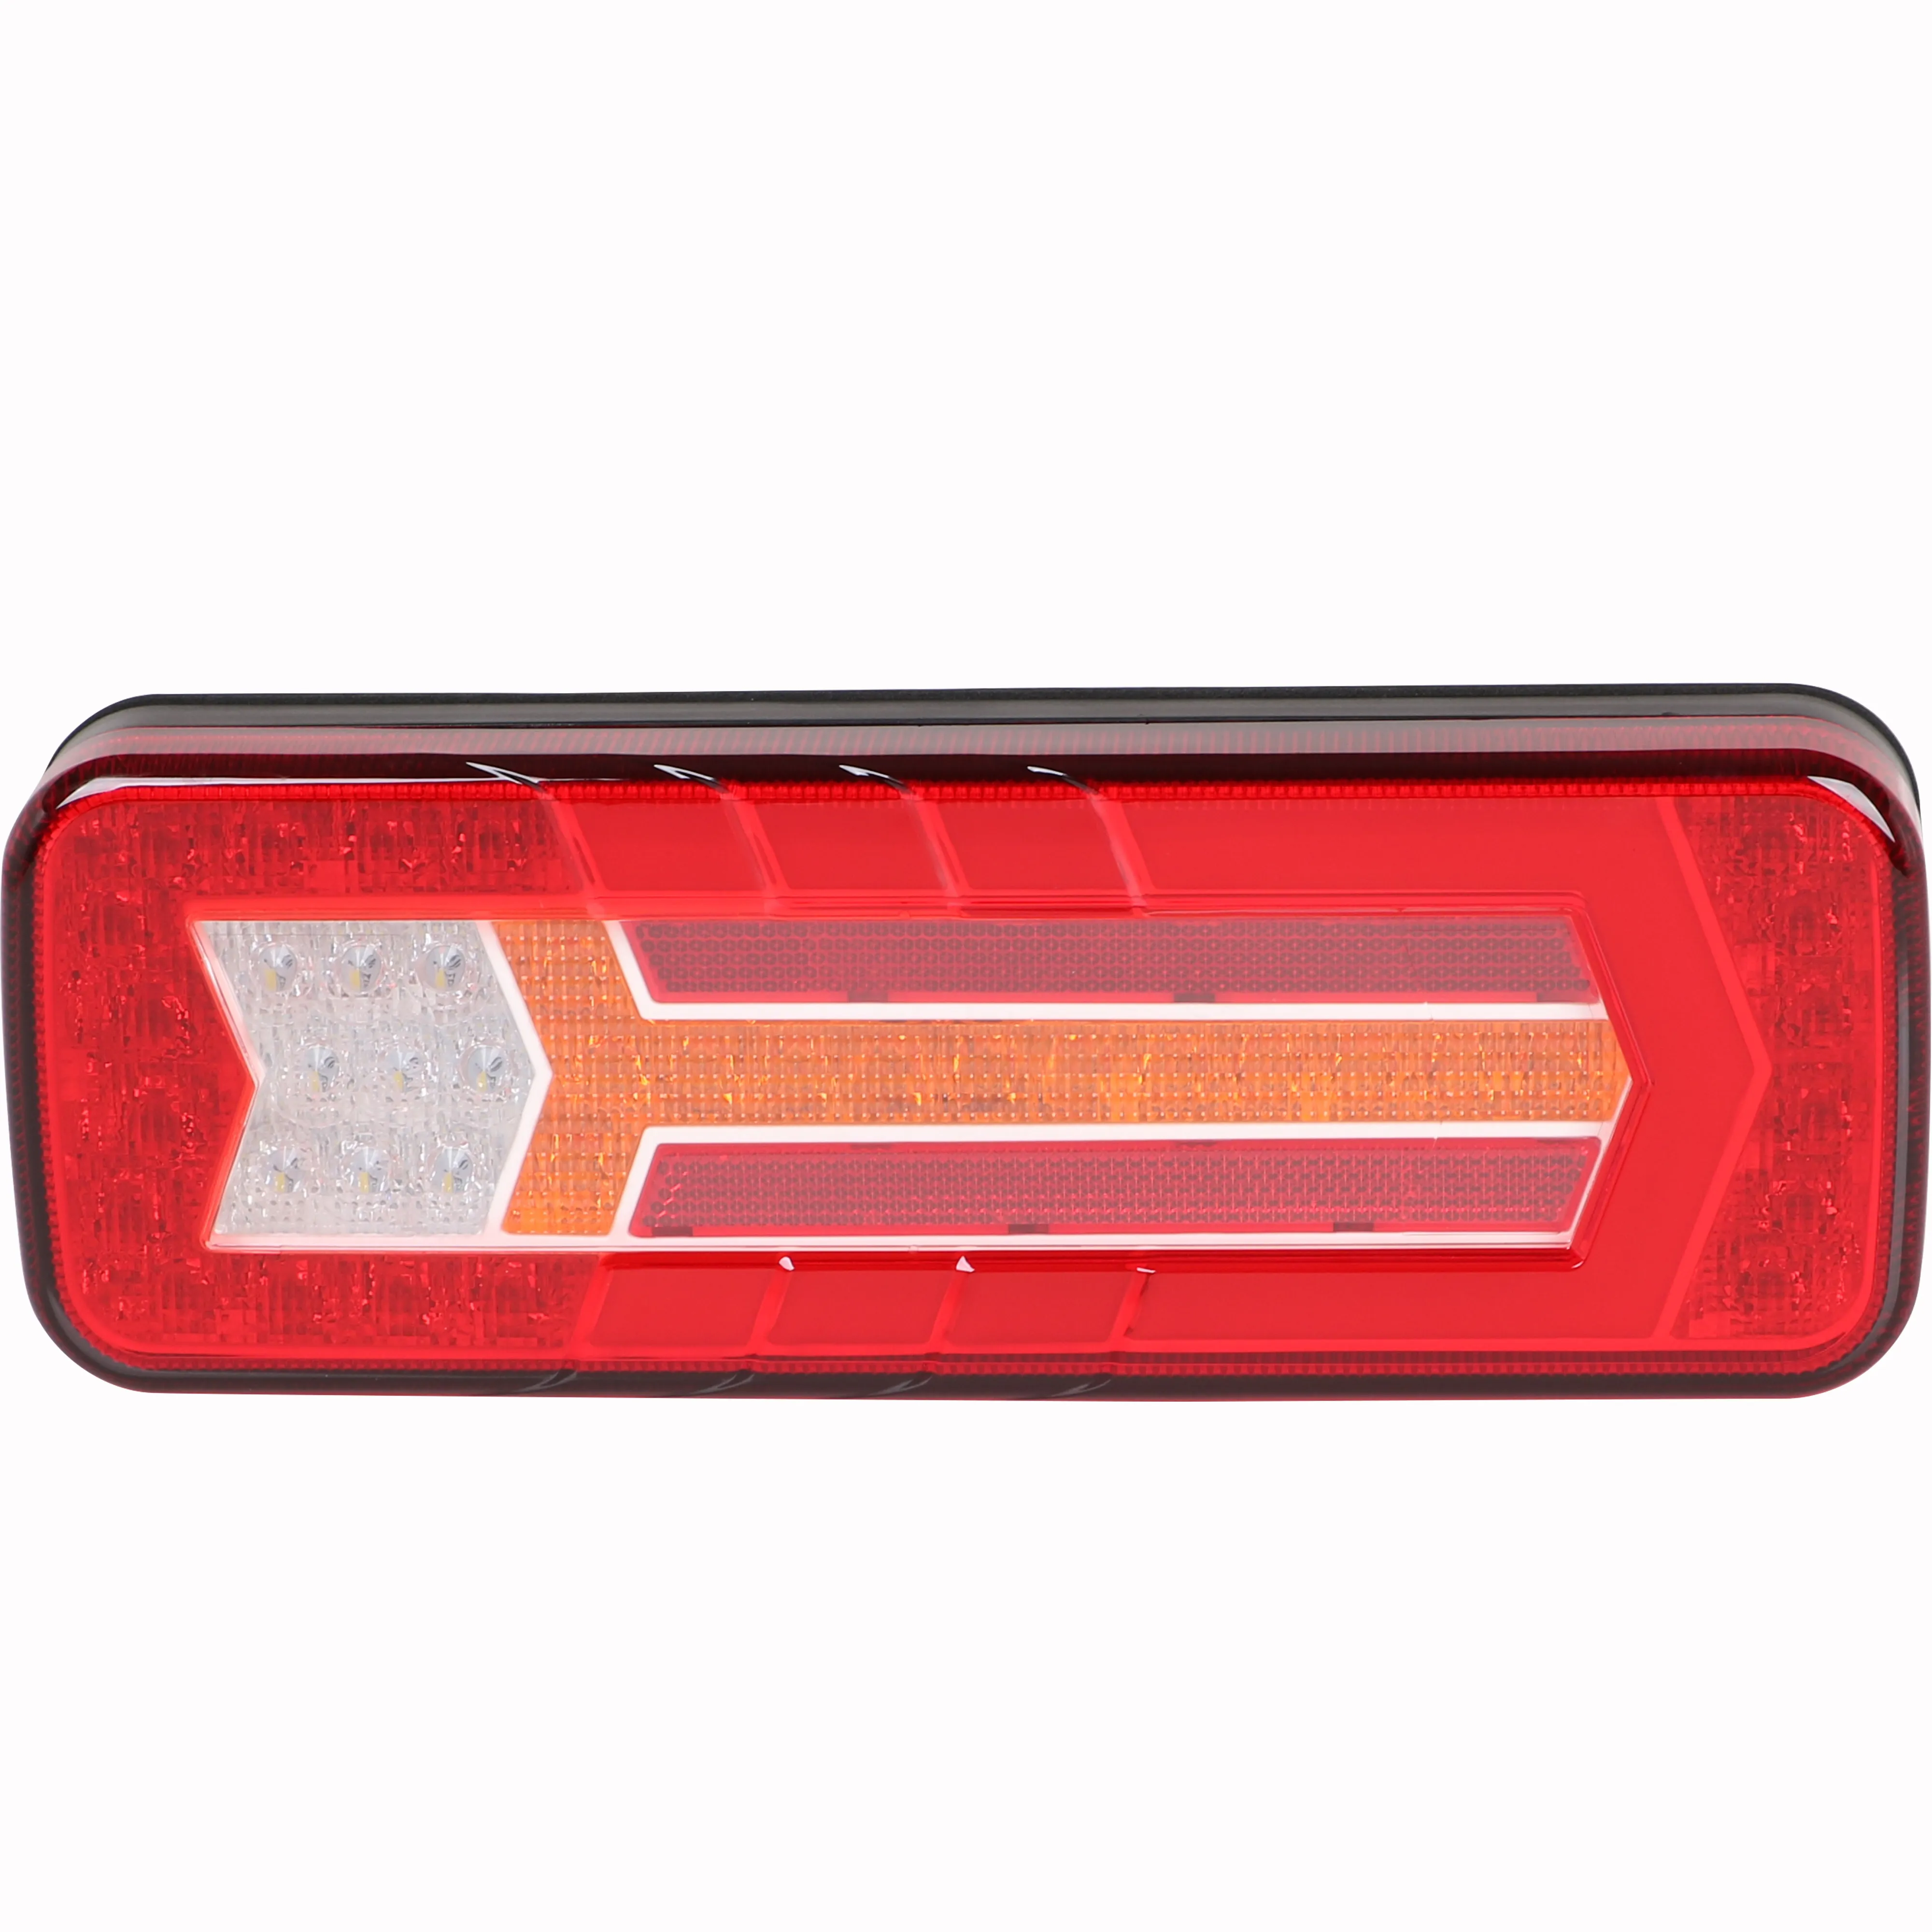 E-MARK Truck Lamp Tail Lights, waterproof rear combination tail lamp for truck and trailer